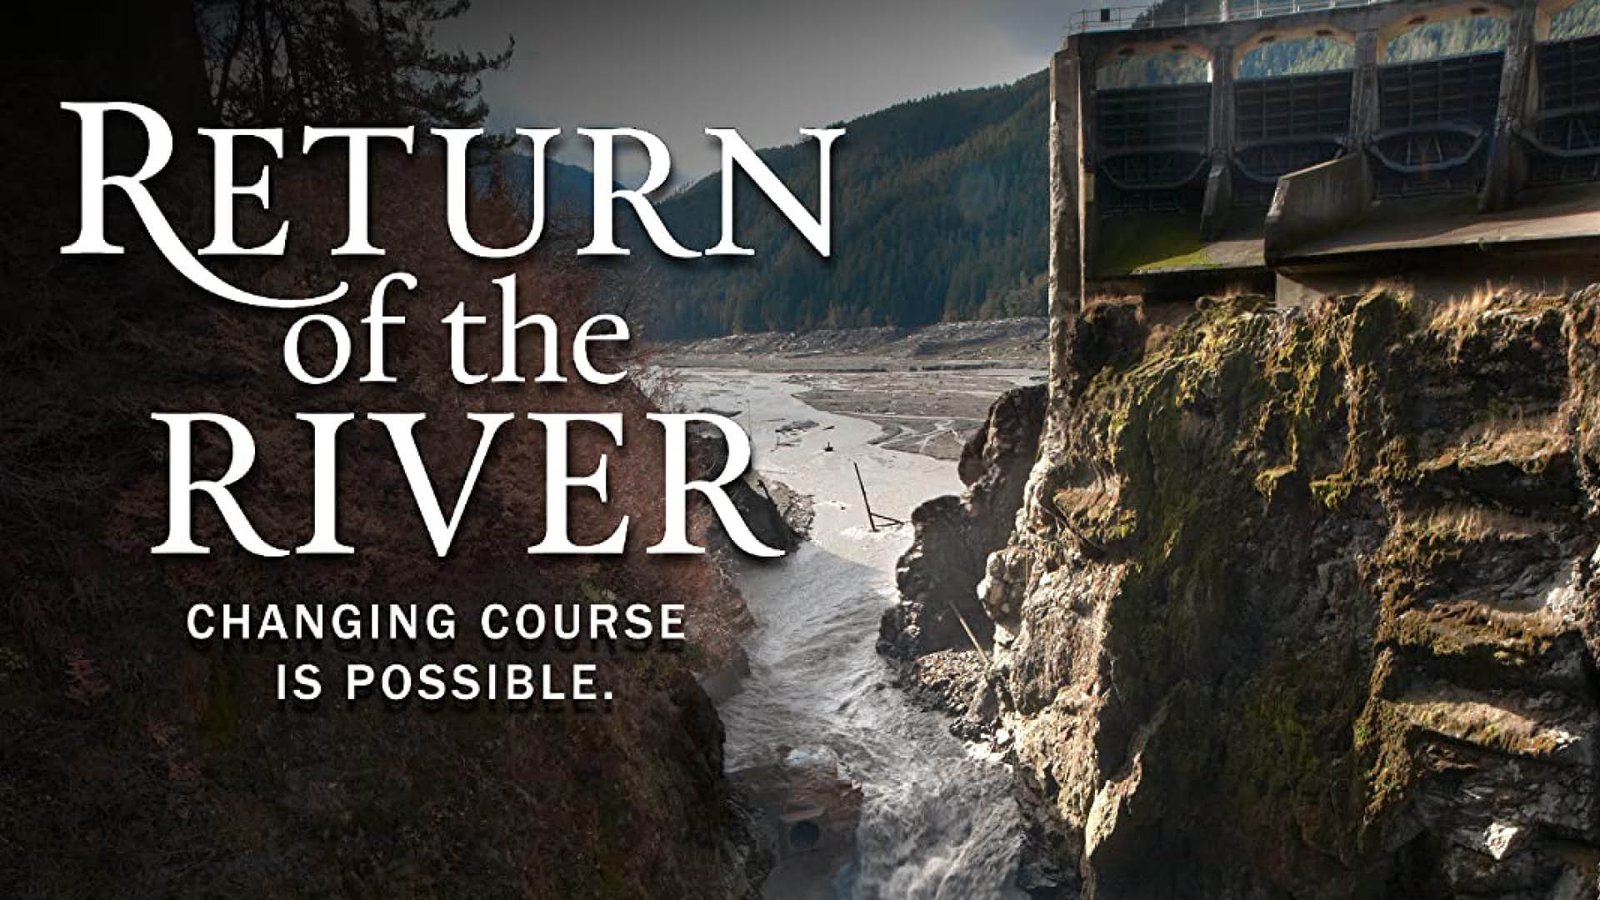 Return of the River - The Largest Dam Removal in History